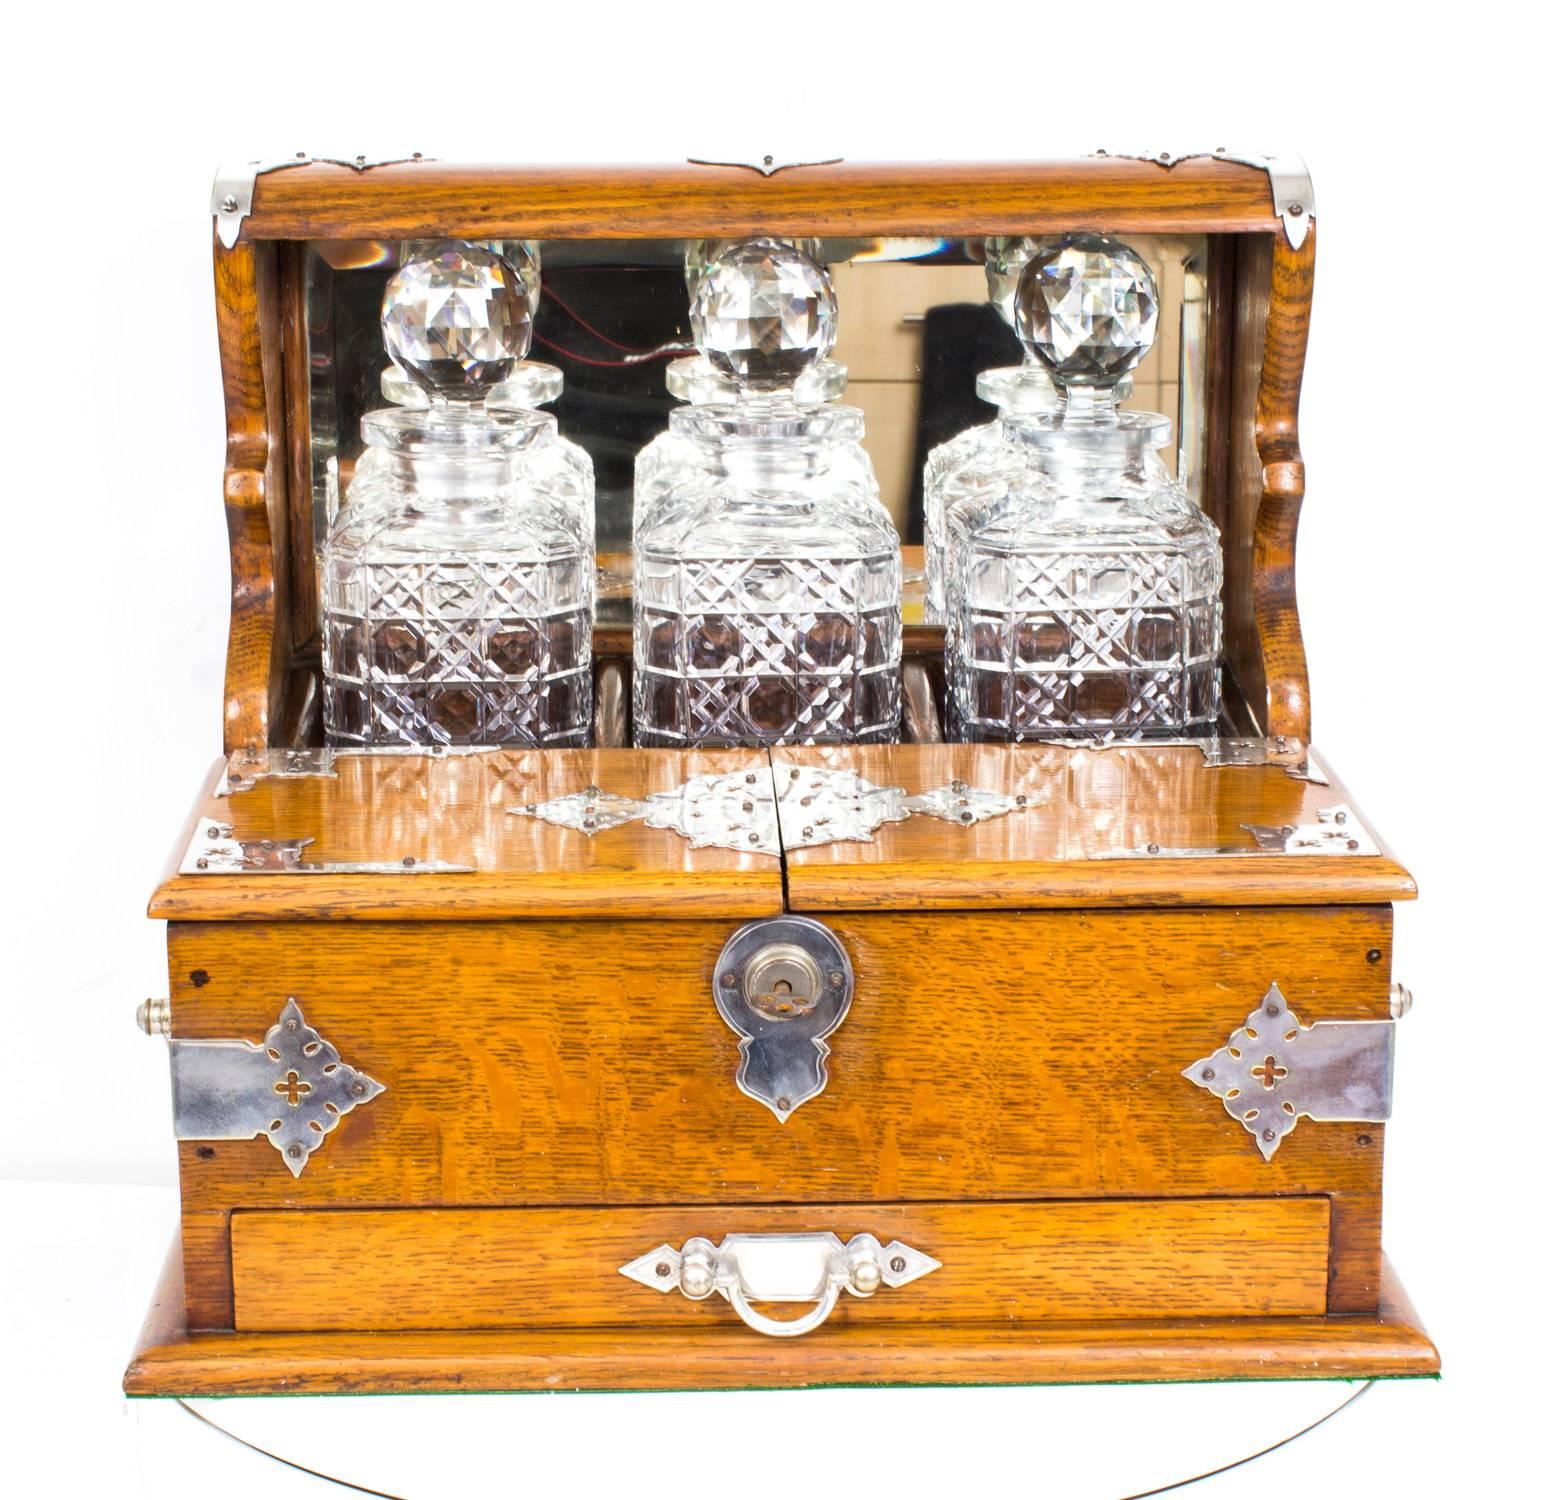 This is a superb antique Victorian oak cased three decanter tantalus with decorative cut brass silver plated mounts, circa 1880 in date.

It was skillfully crafted in tiger oak with beautiful silver plated mounts and stylish handles. There are